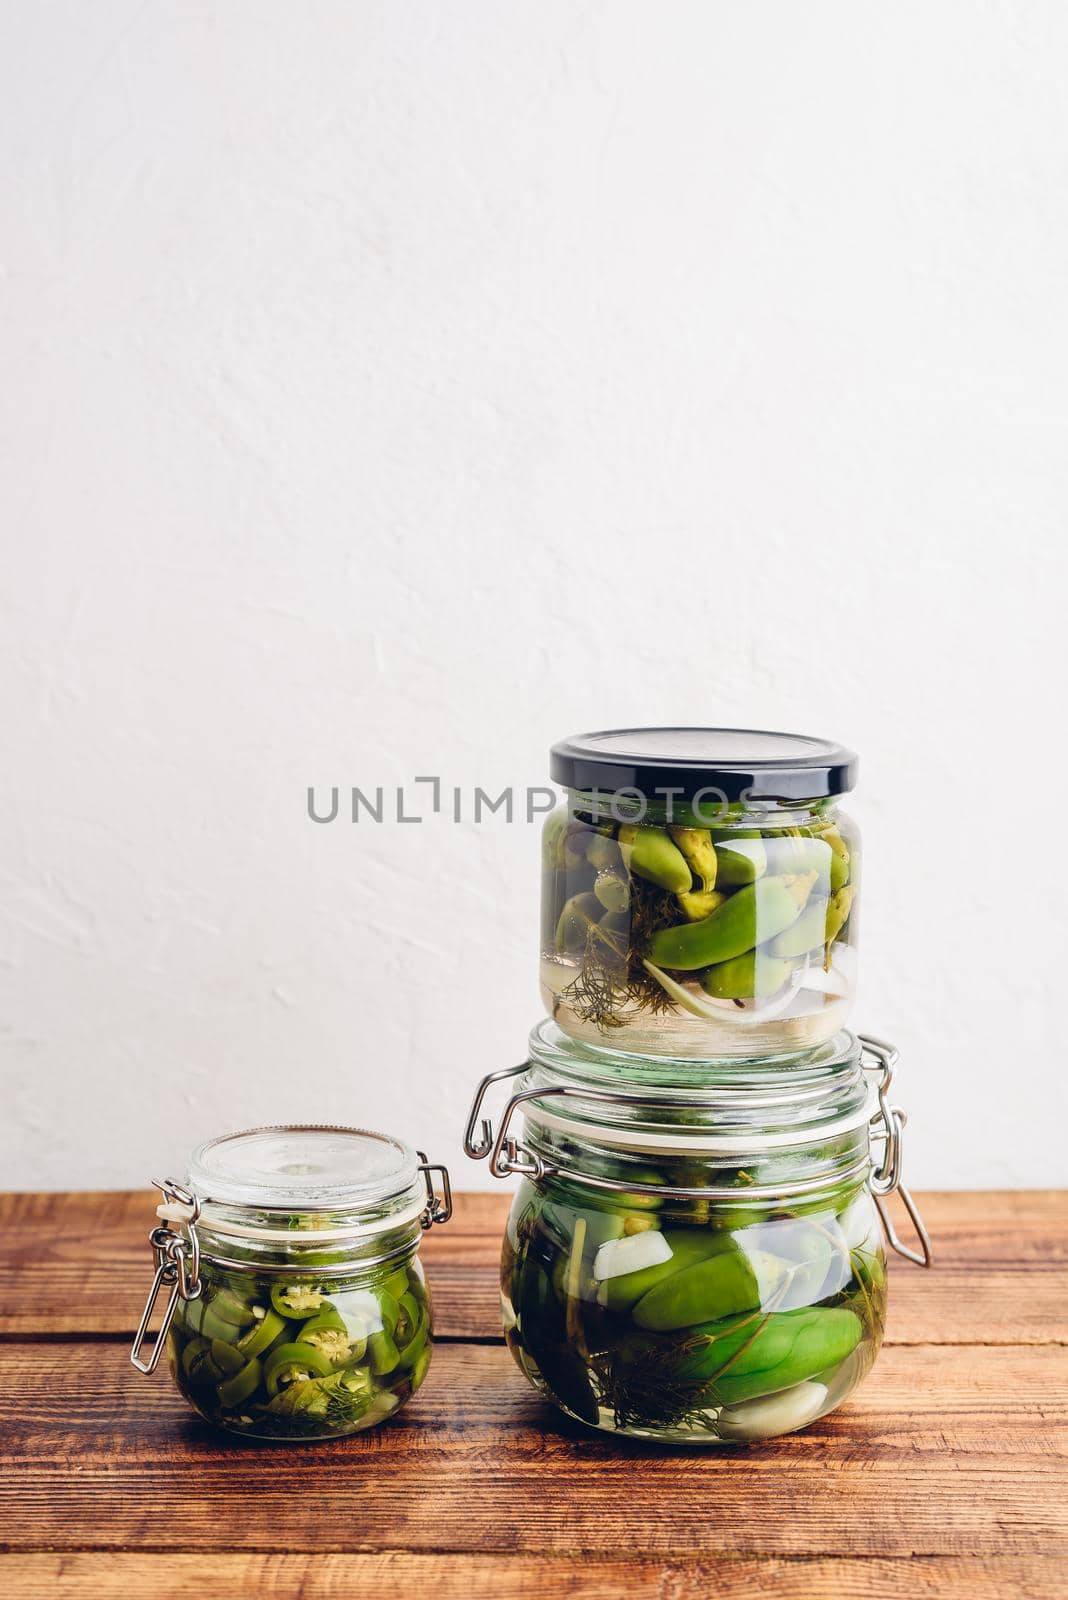 Three Jars of Freshly Pickled Jalapeno Peppers on Wooden Table. Copy Space